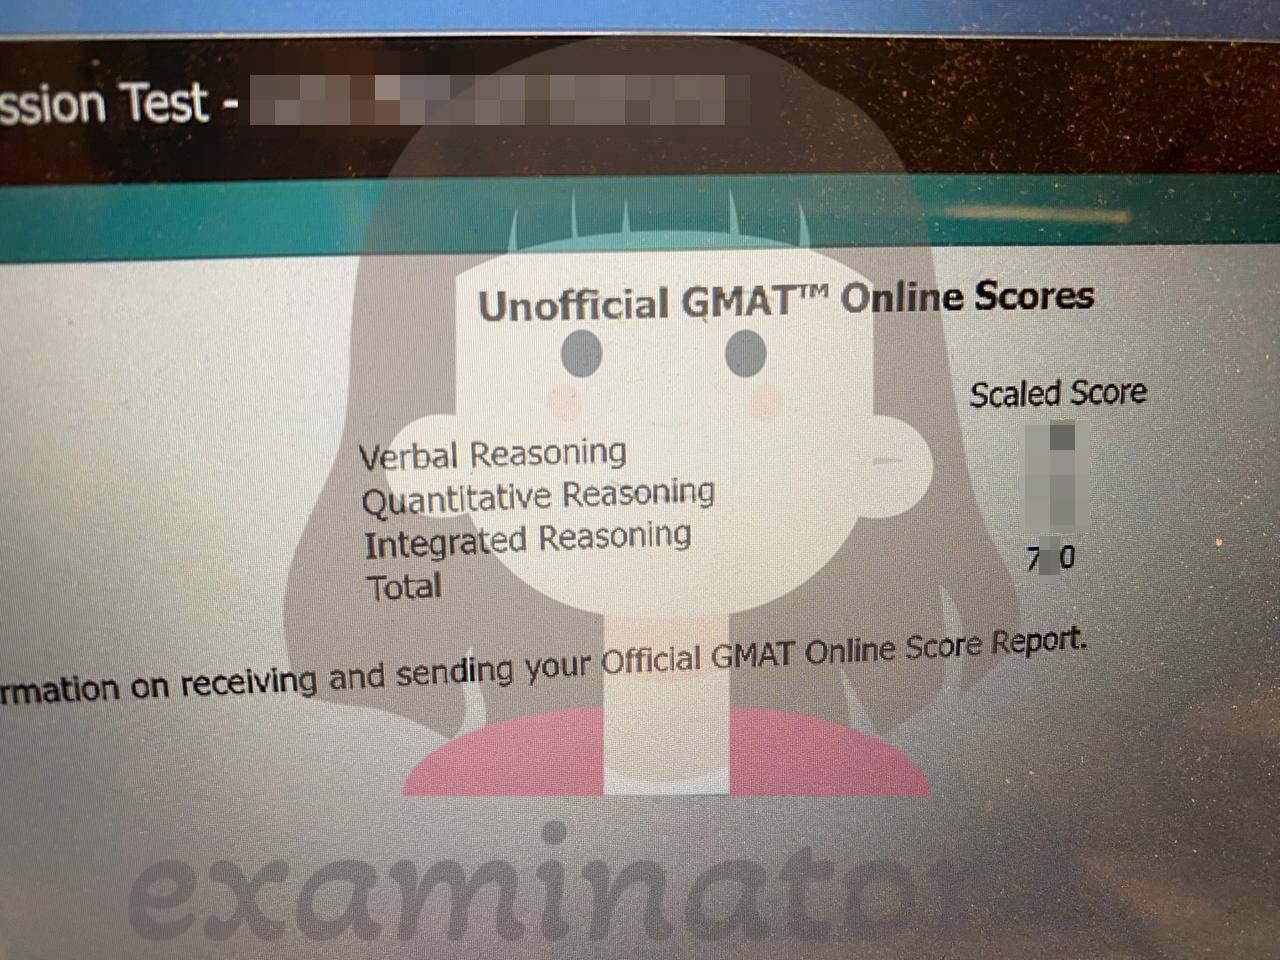 🇧🇸 Shattering Expectations: With Our GMAT Cheating Experts' Help, Bahamian Client Secures Stellar GMAT Scores! 🤩 Rest Assured, Official and Unofficial Scores Show Perfect Consistency - No Discrepancies Here!